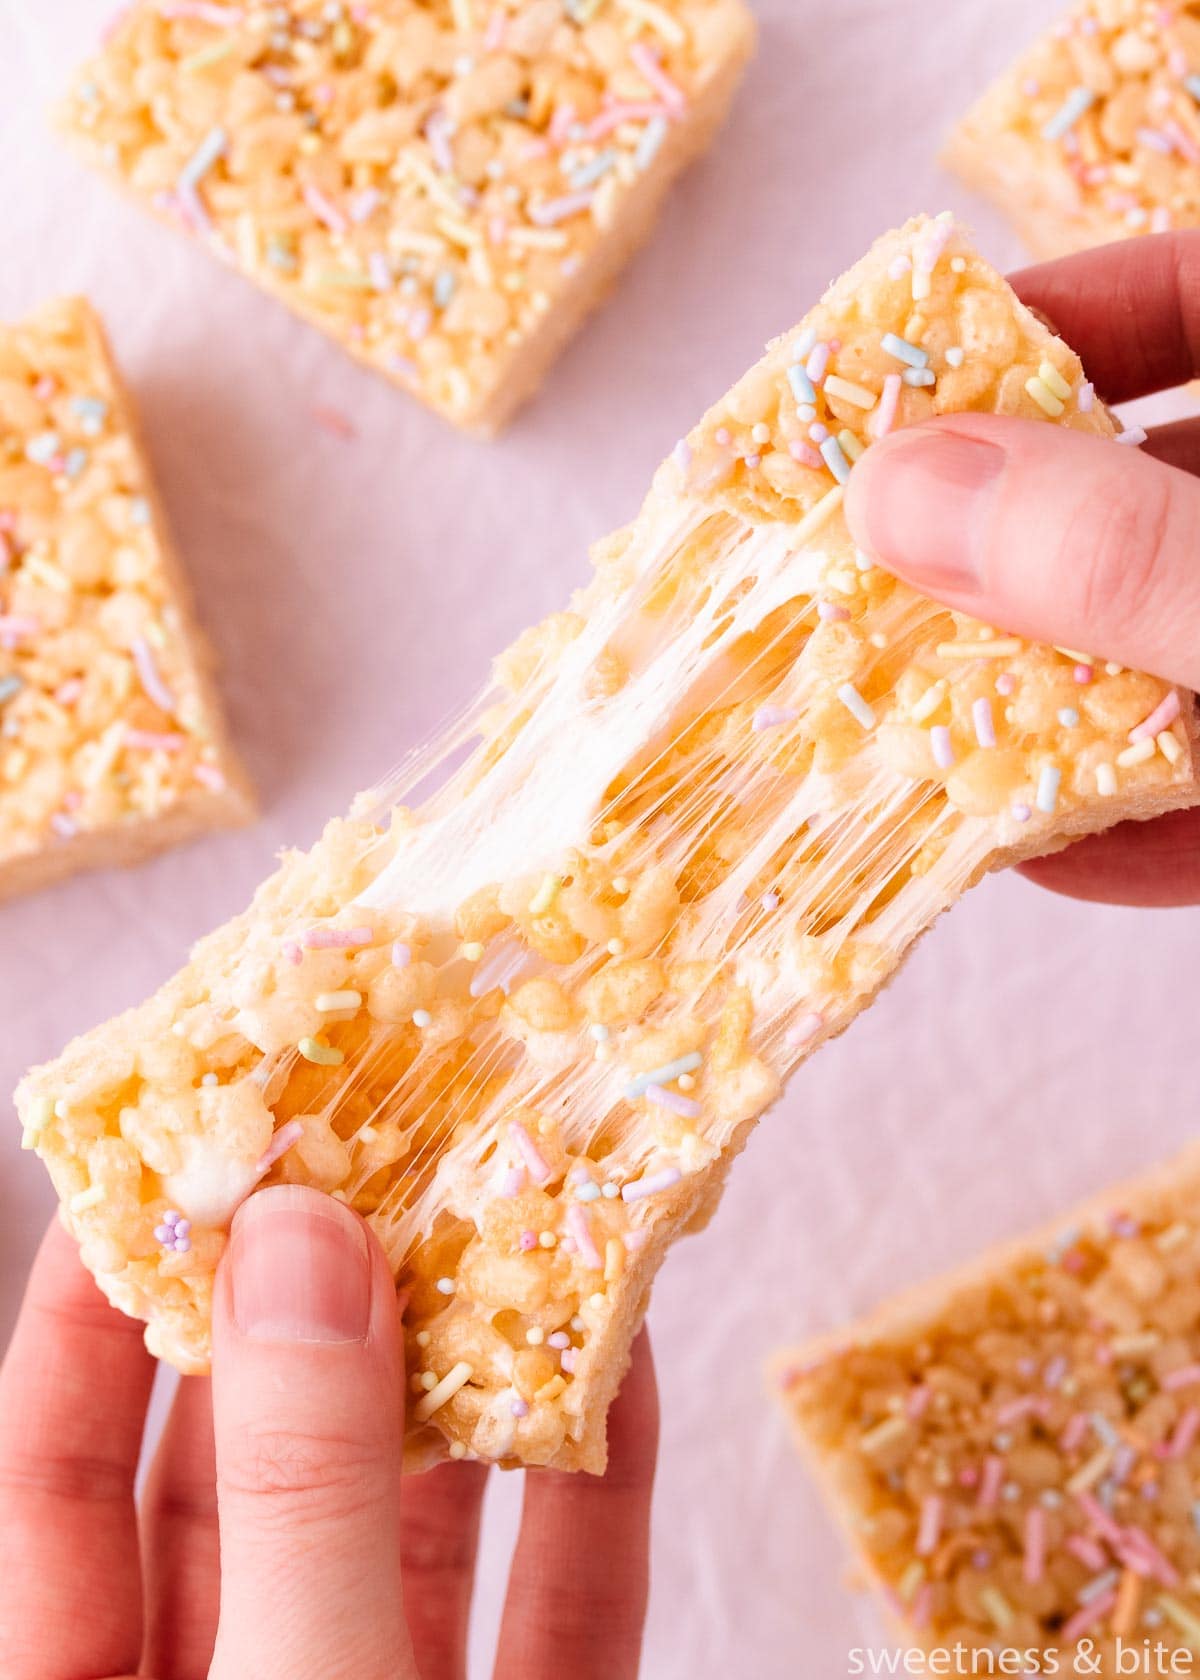 A gluten free rice krispie treat being pulled apart by two hands, showing the marshmallow stretching as it is pulled.